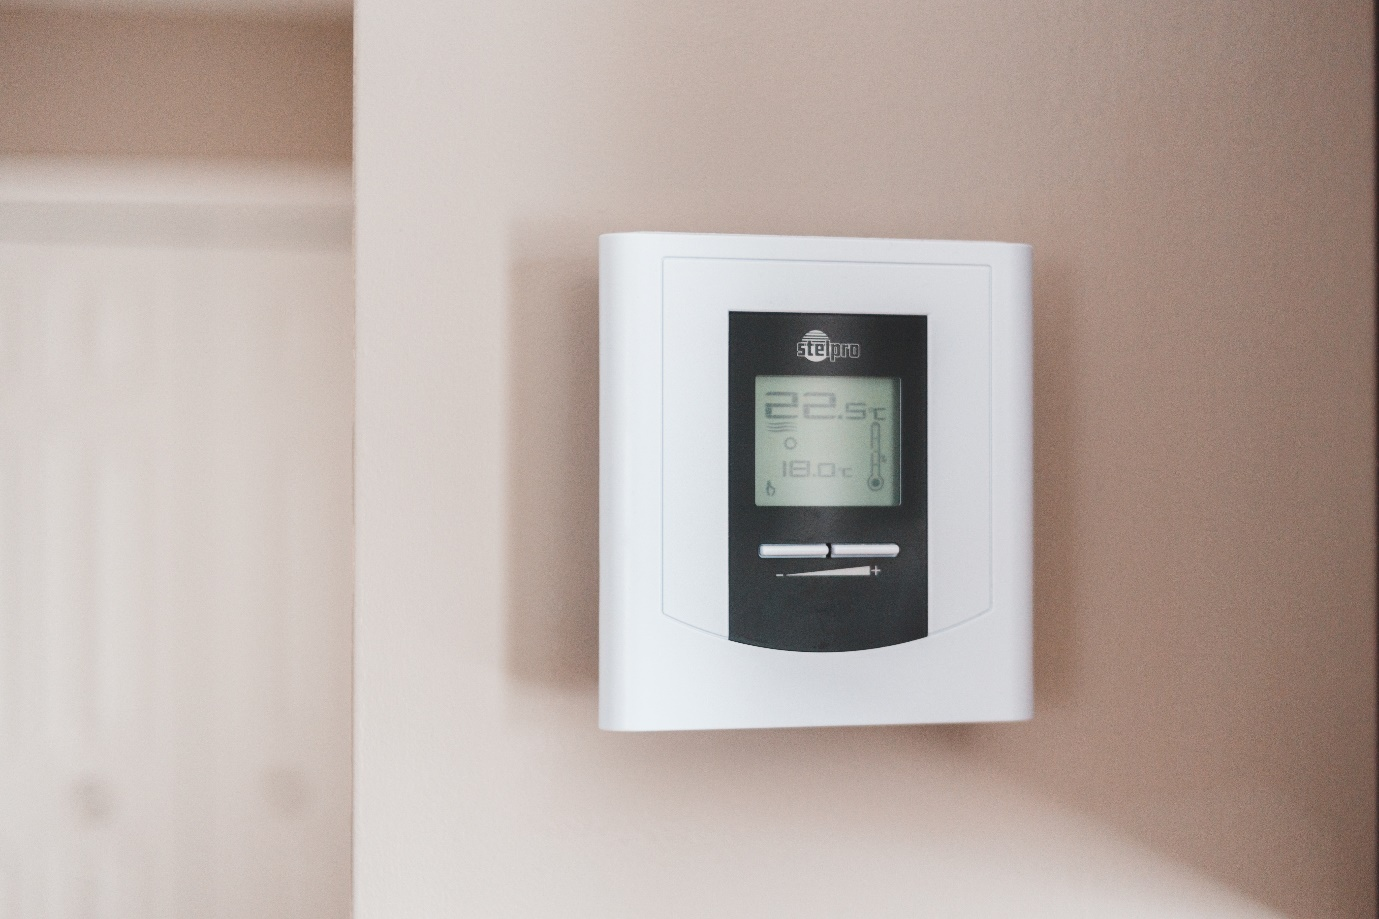 A thermostat hanging on a wall to control relative humidity